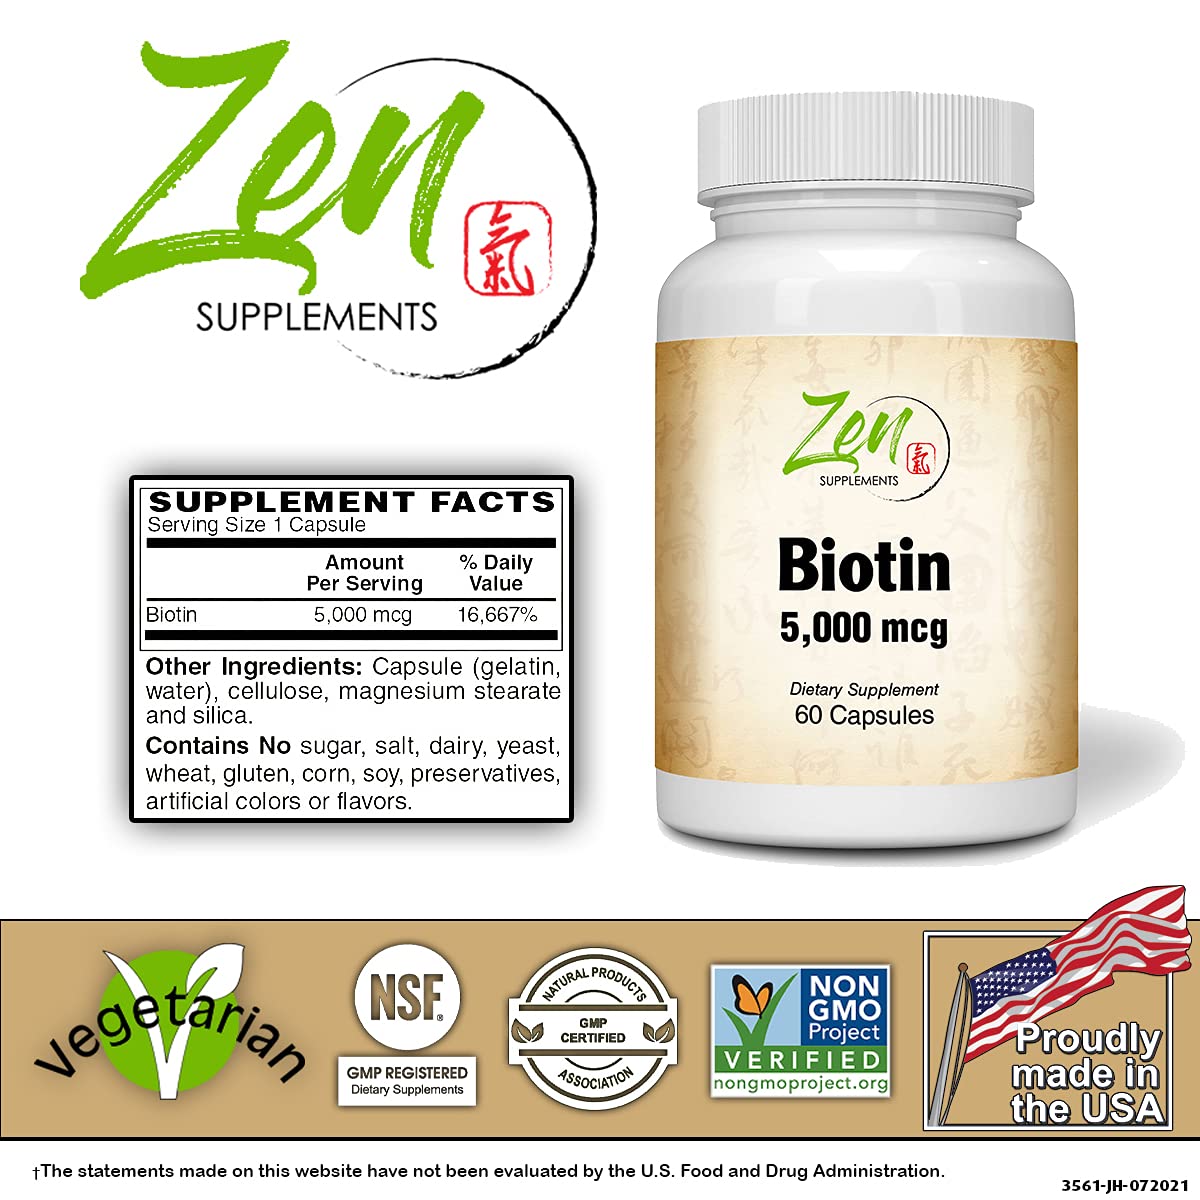 Zen Supplements - Biotin 5000 Mcg 60-Caps - Supports Healthy Hair, Skin & Nails in Individuals w/ Biotin Deficiency - May Provide for Hair Growth